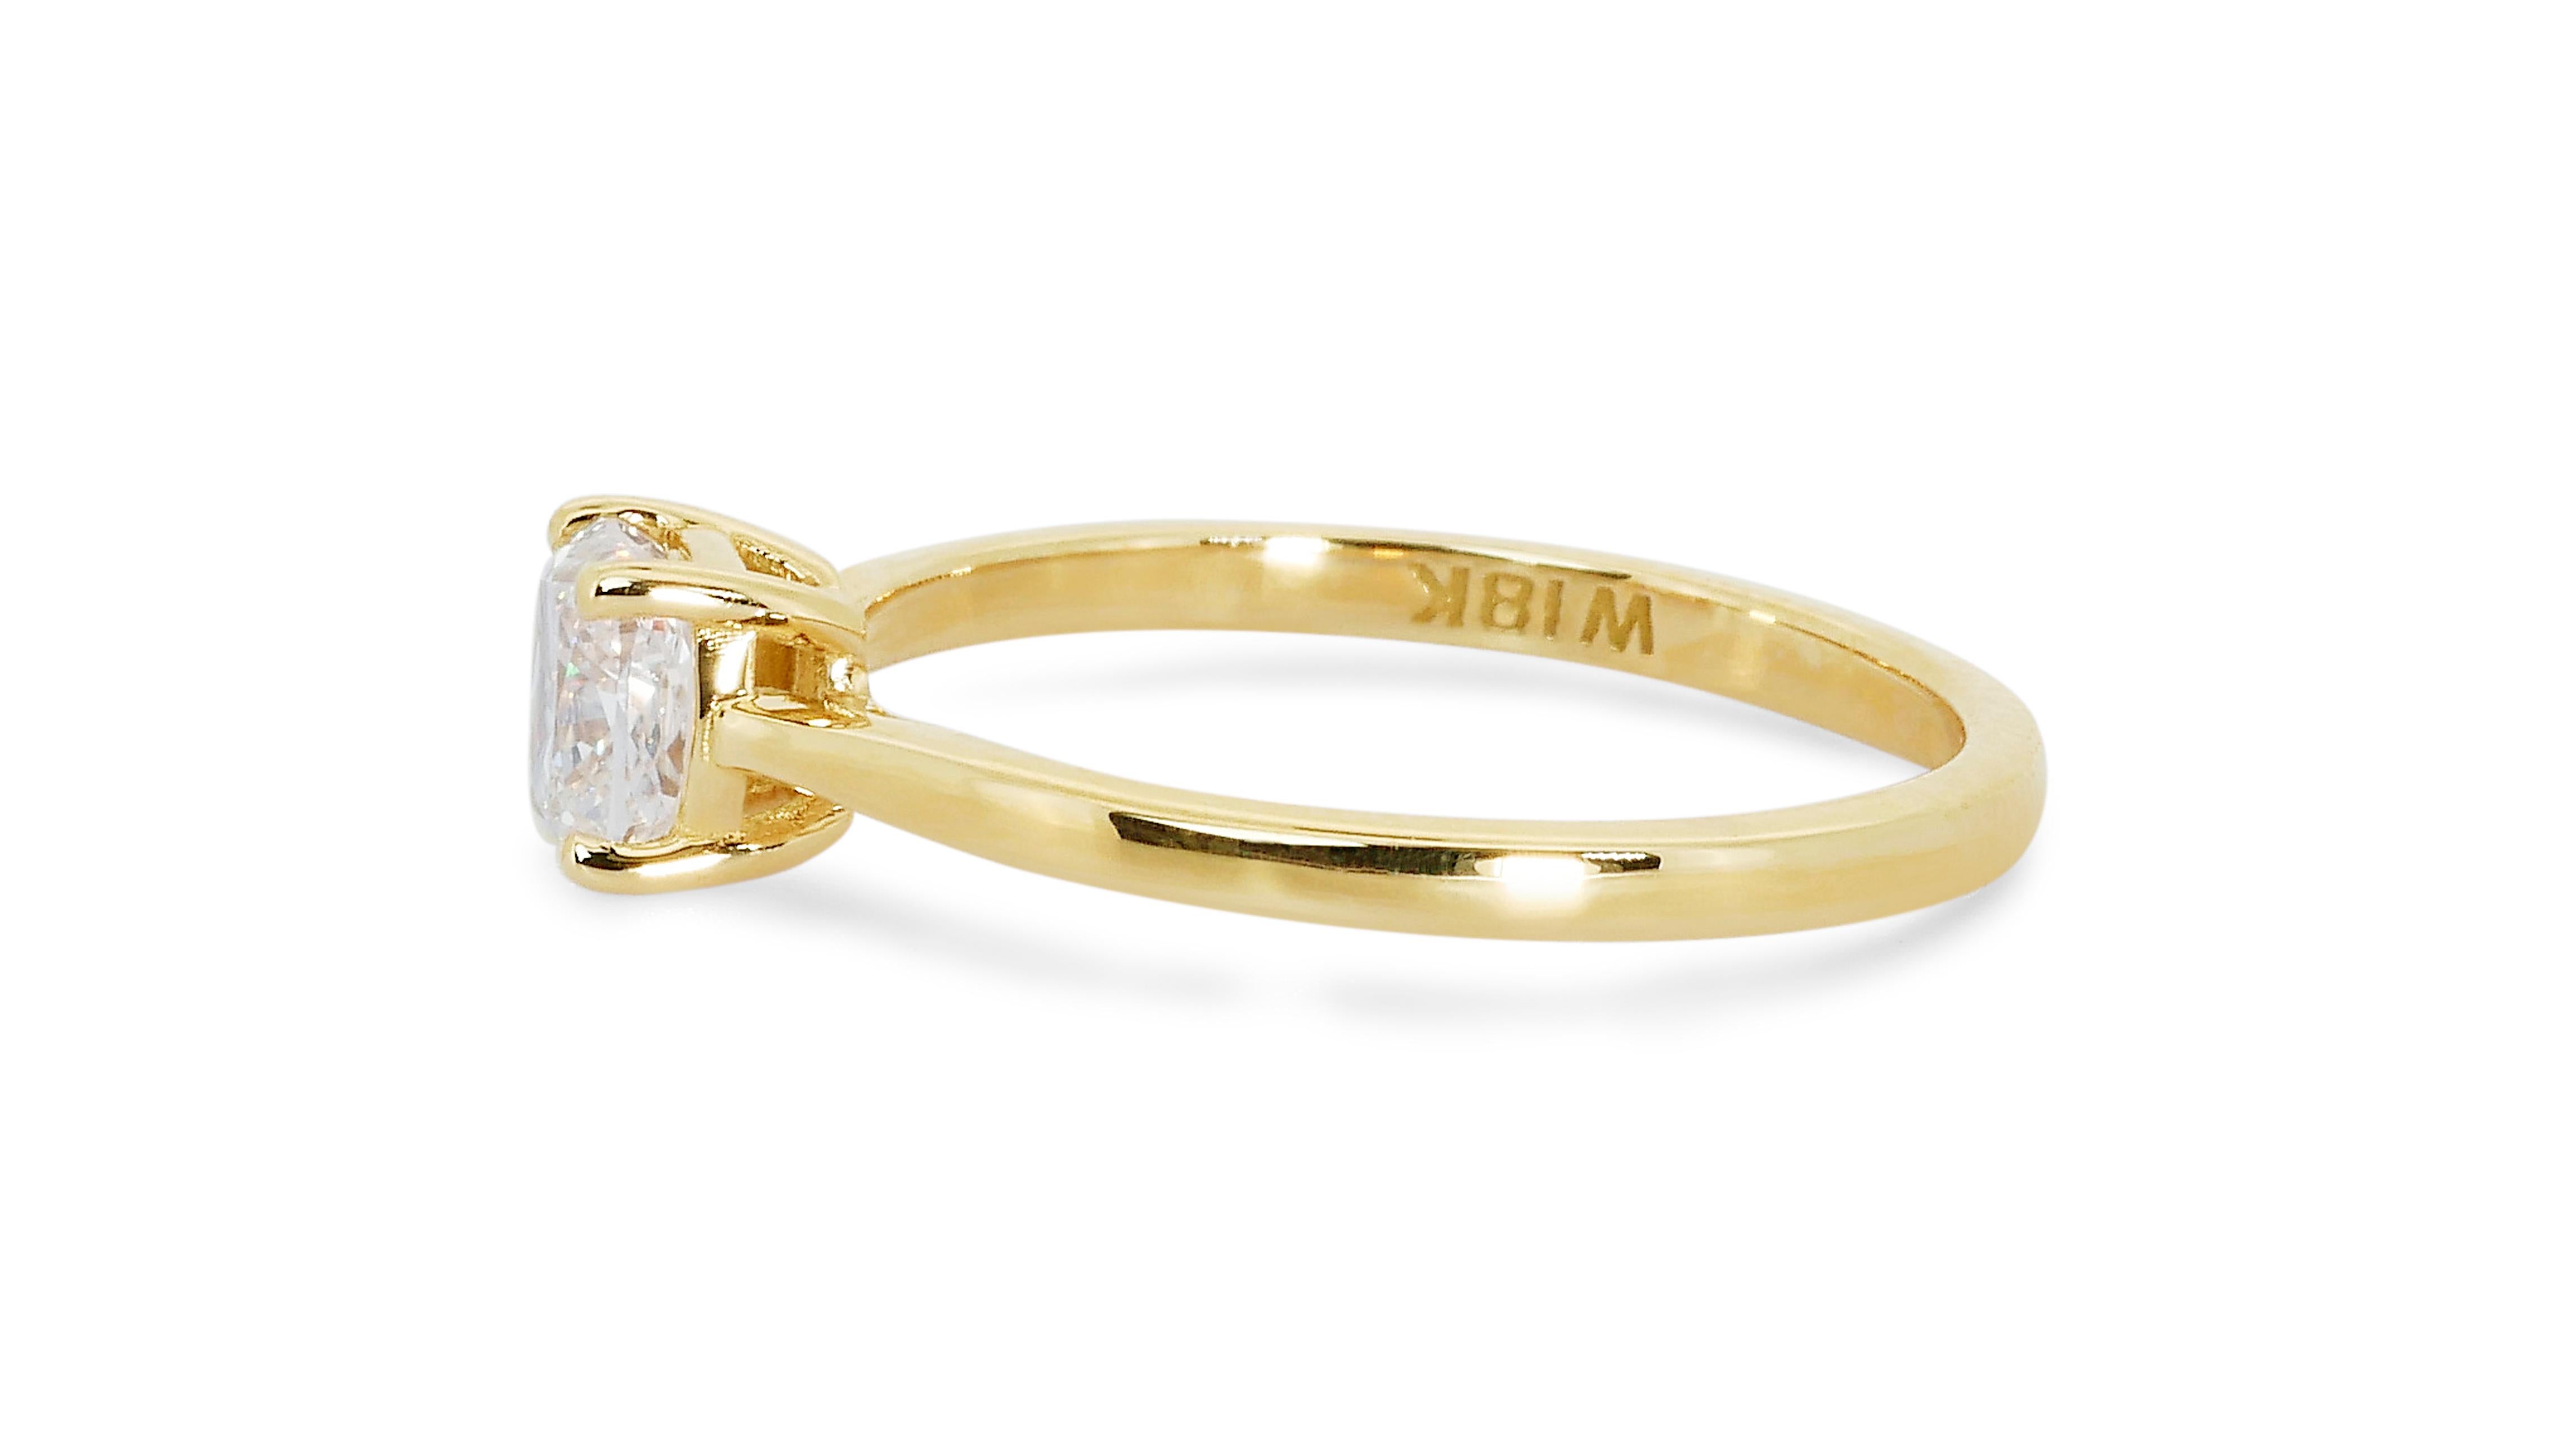 Marvelous 18k Yellow Gold Solitaire Ring w/ 0.7 Carat Natural Diamonds IGI Cert In New Condition For Sale In רמת גן, IL